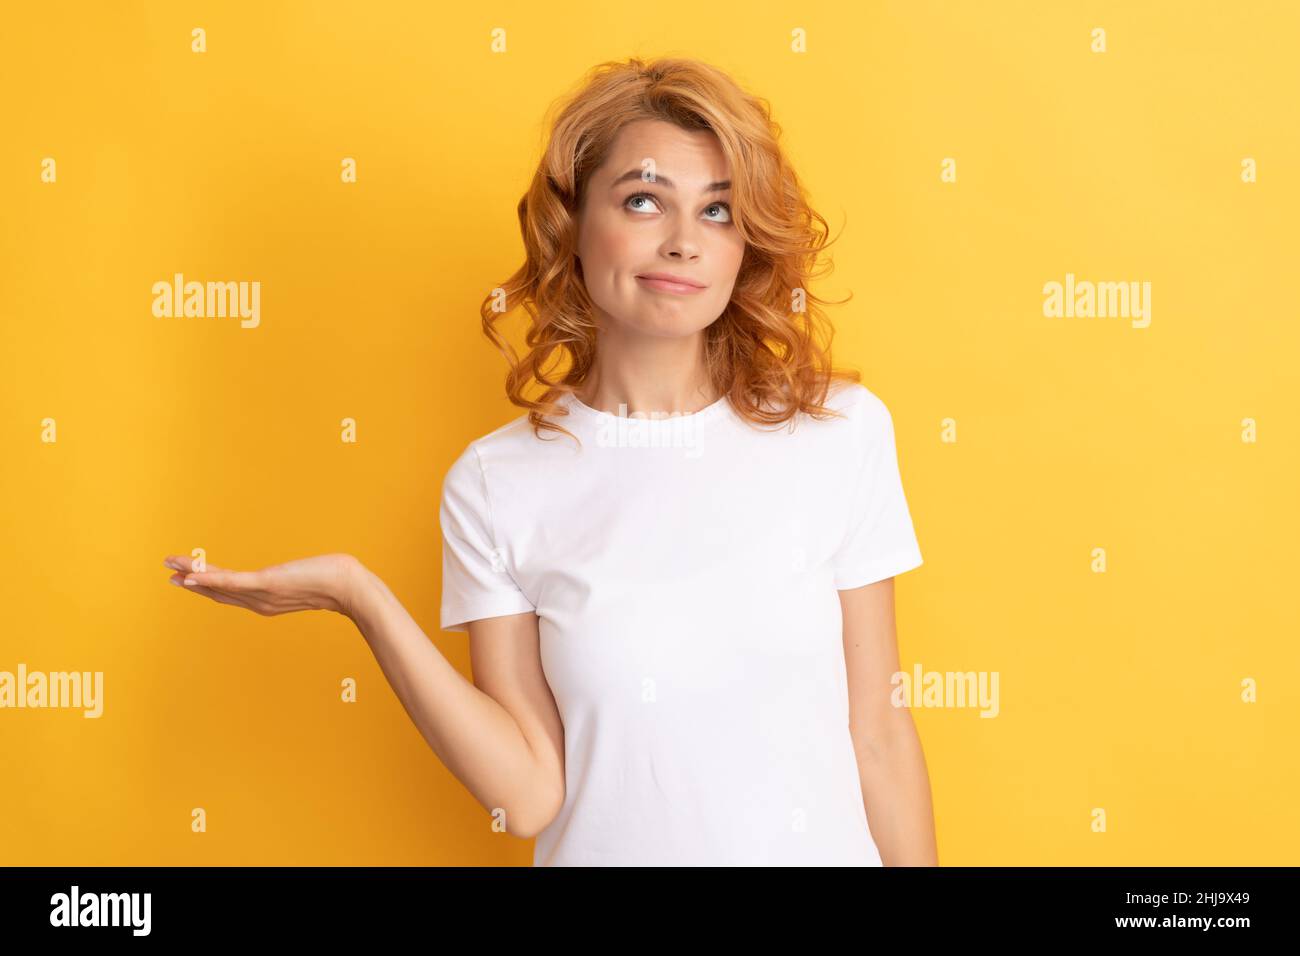 pondering redhead woman presenting product on yellow background with copy space Stock Photo